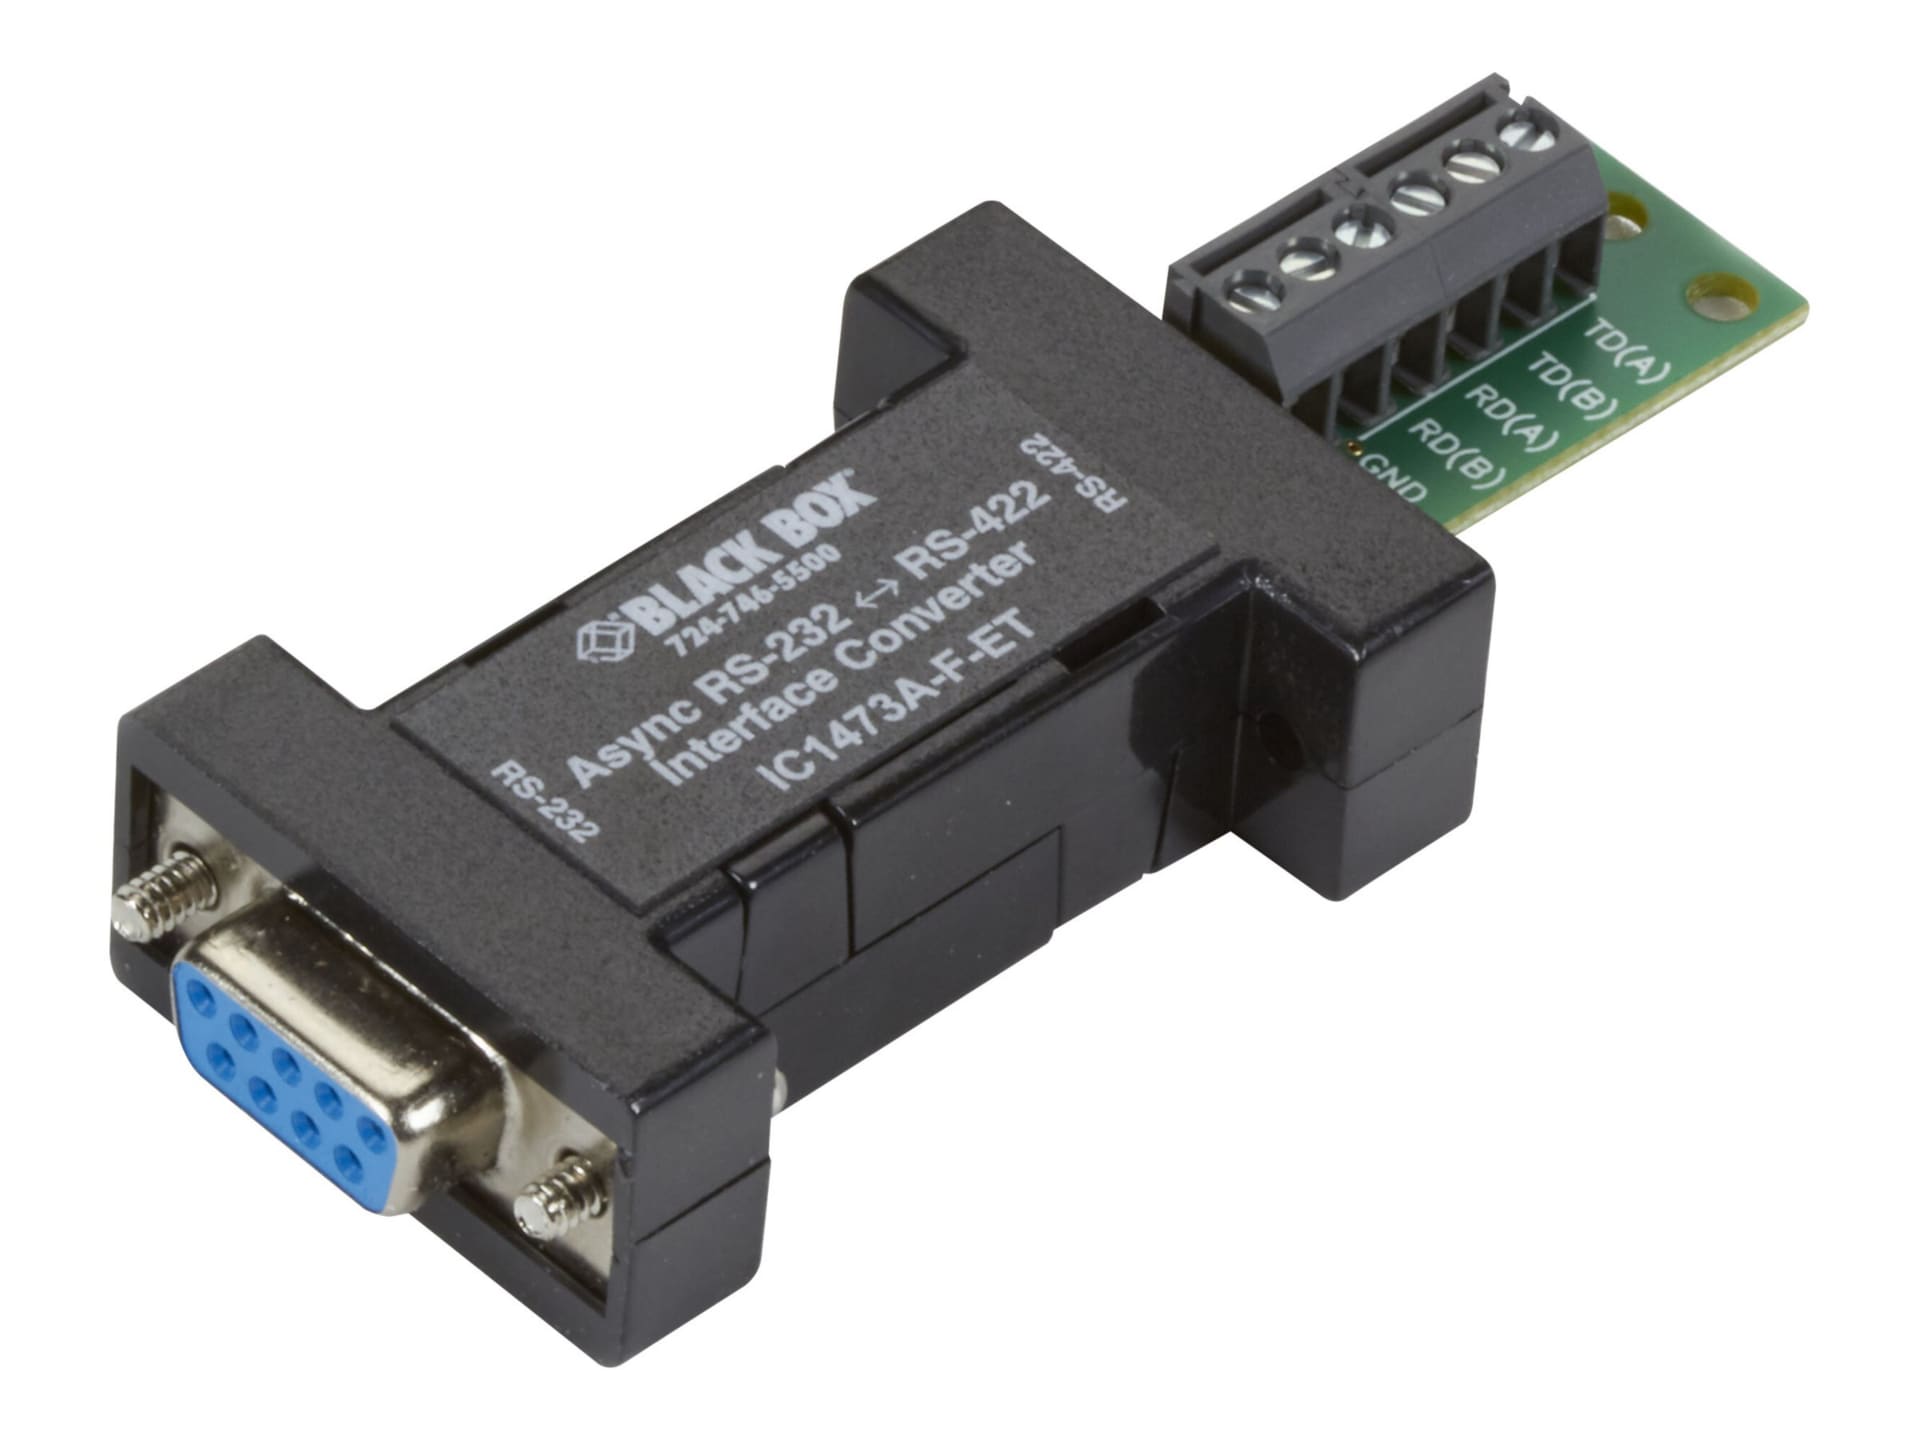 Black Box Async RS-232 to RS-422 Interface Converter - serial adapter - RS-232